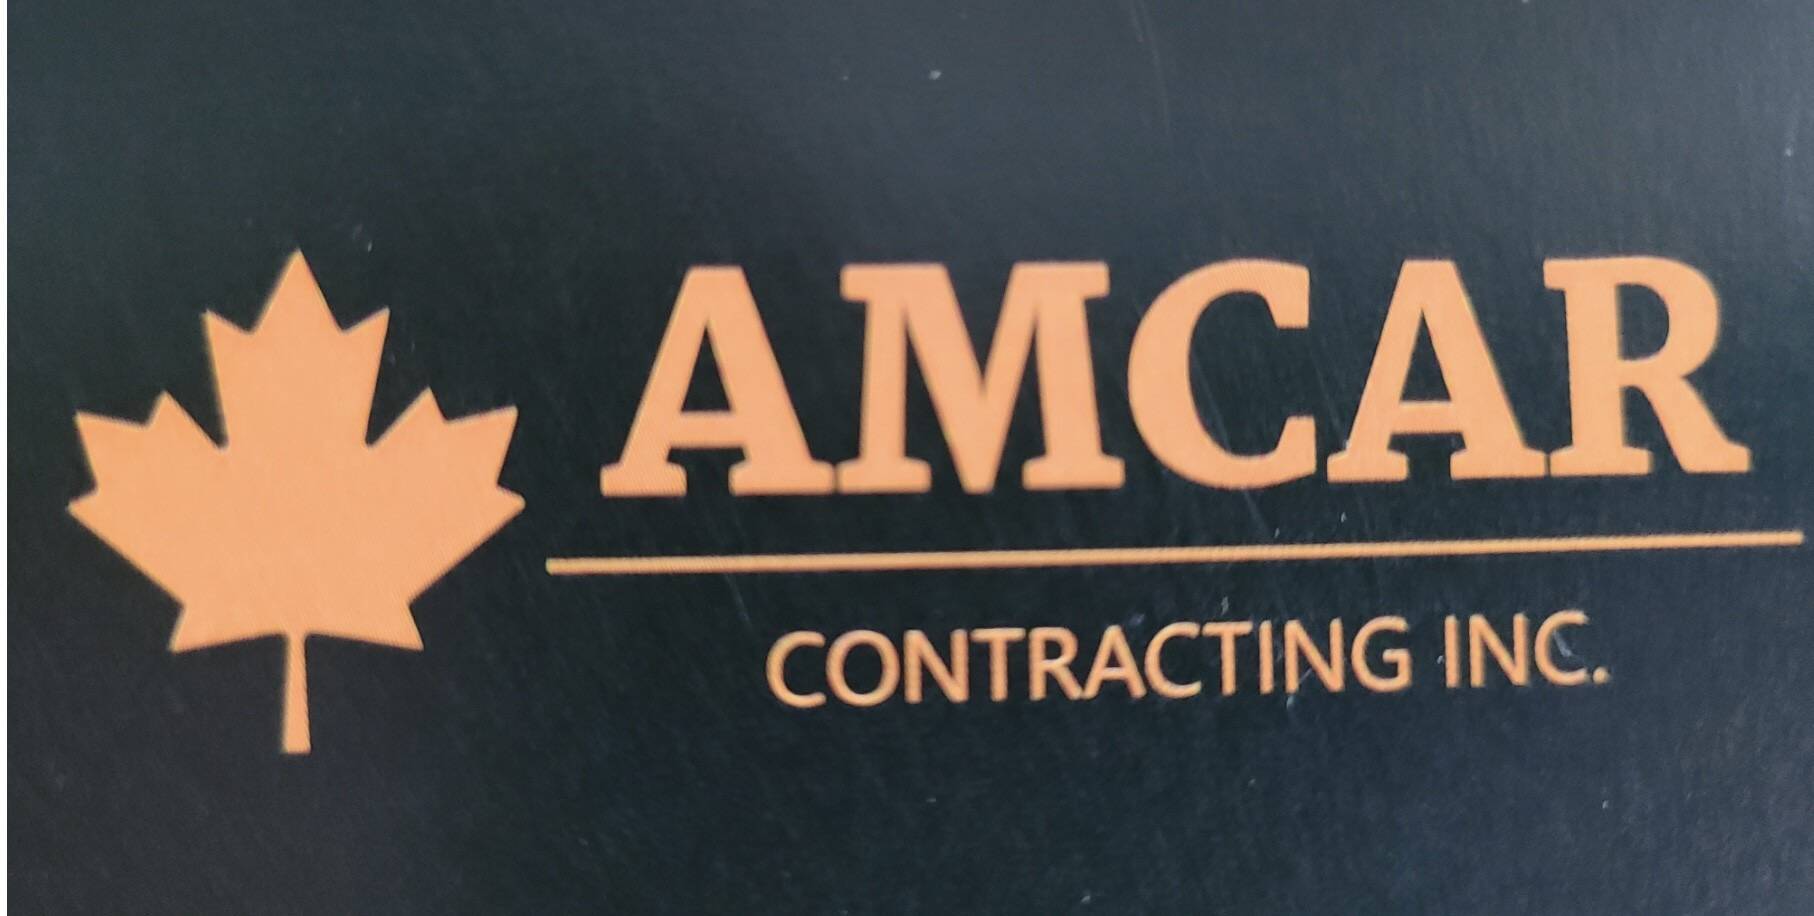 Amcar Contracting